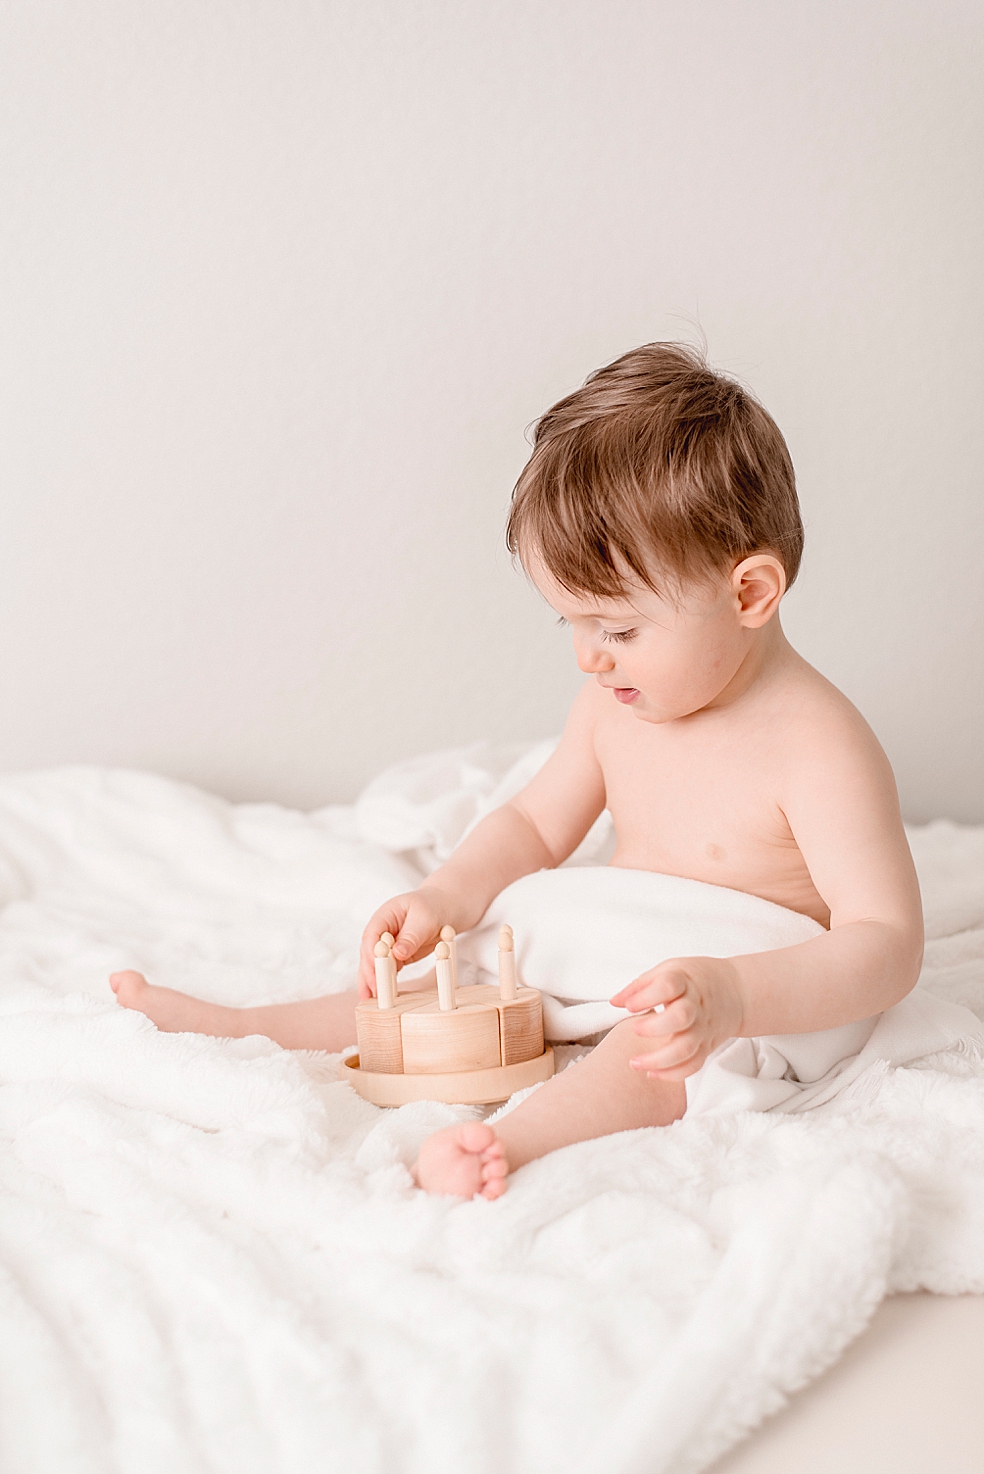 Baby boy on soft white blanket playing with wooden cake toy | Photo by Jessica Lee Photography